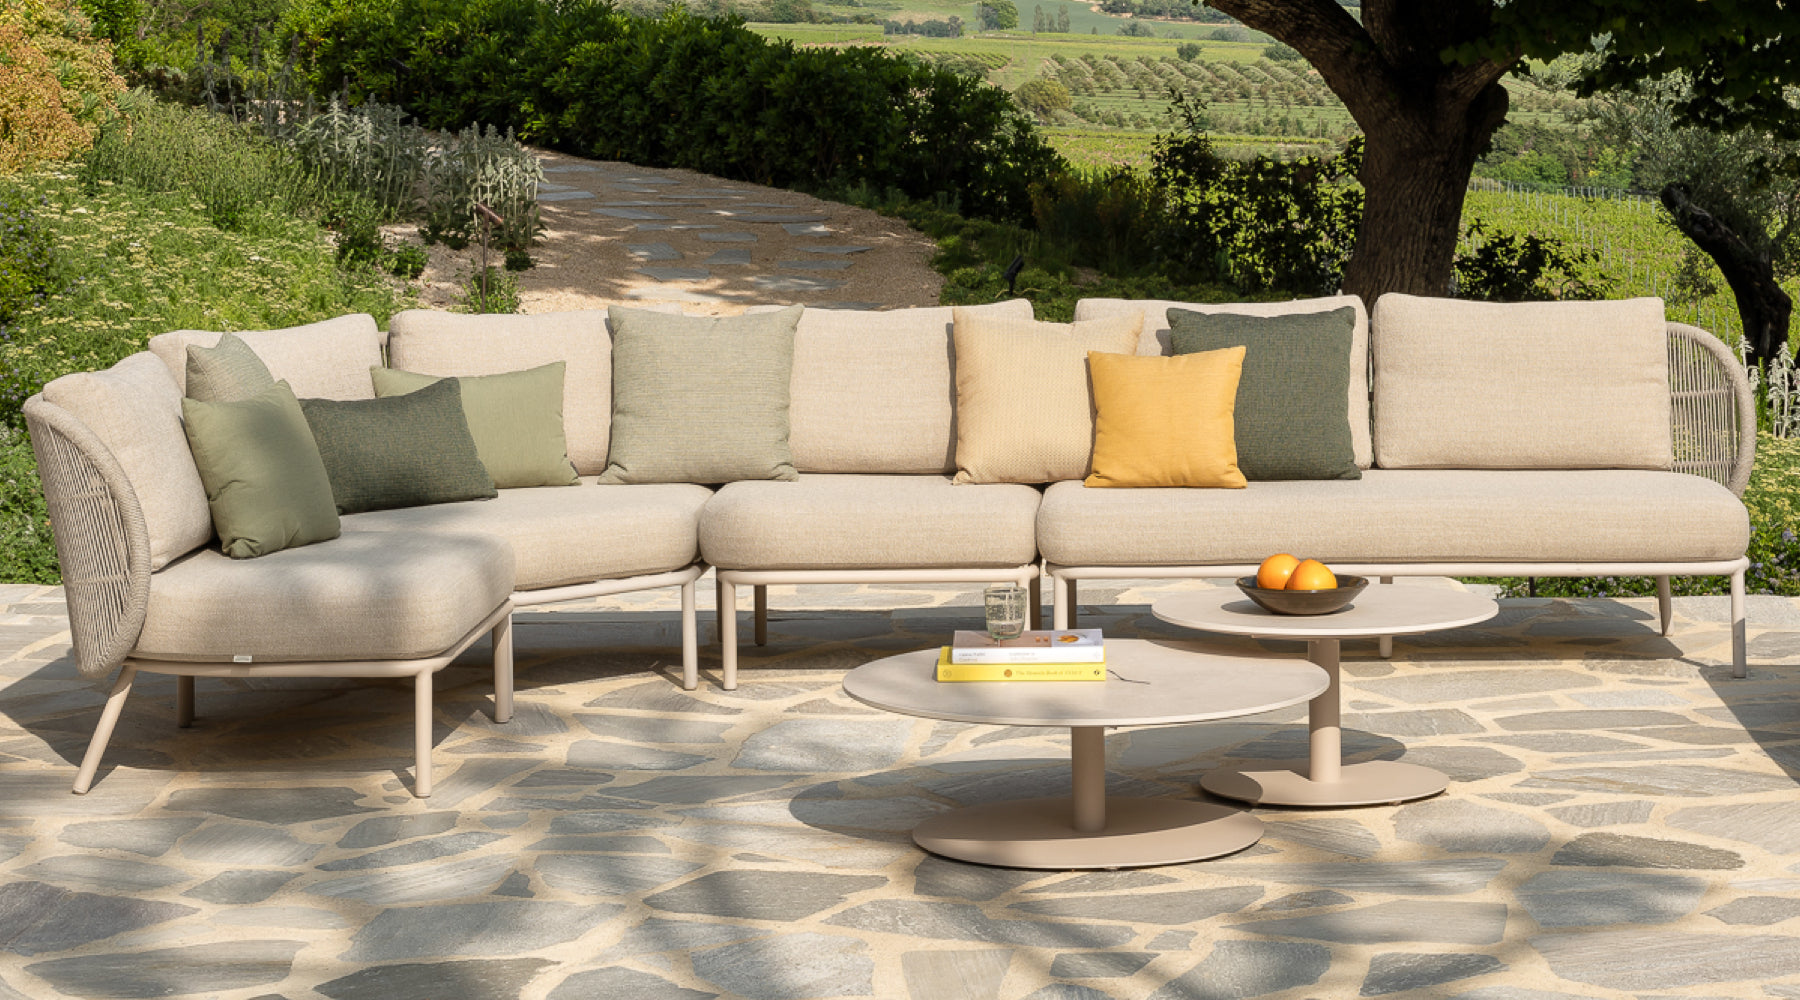 Boxhill luxury outdoor lounge furniture partners with Vincent Sheppard